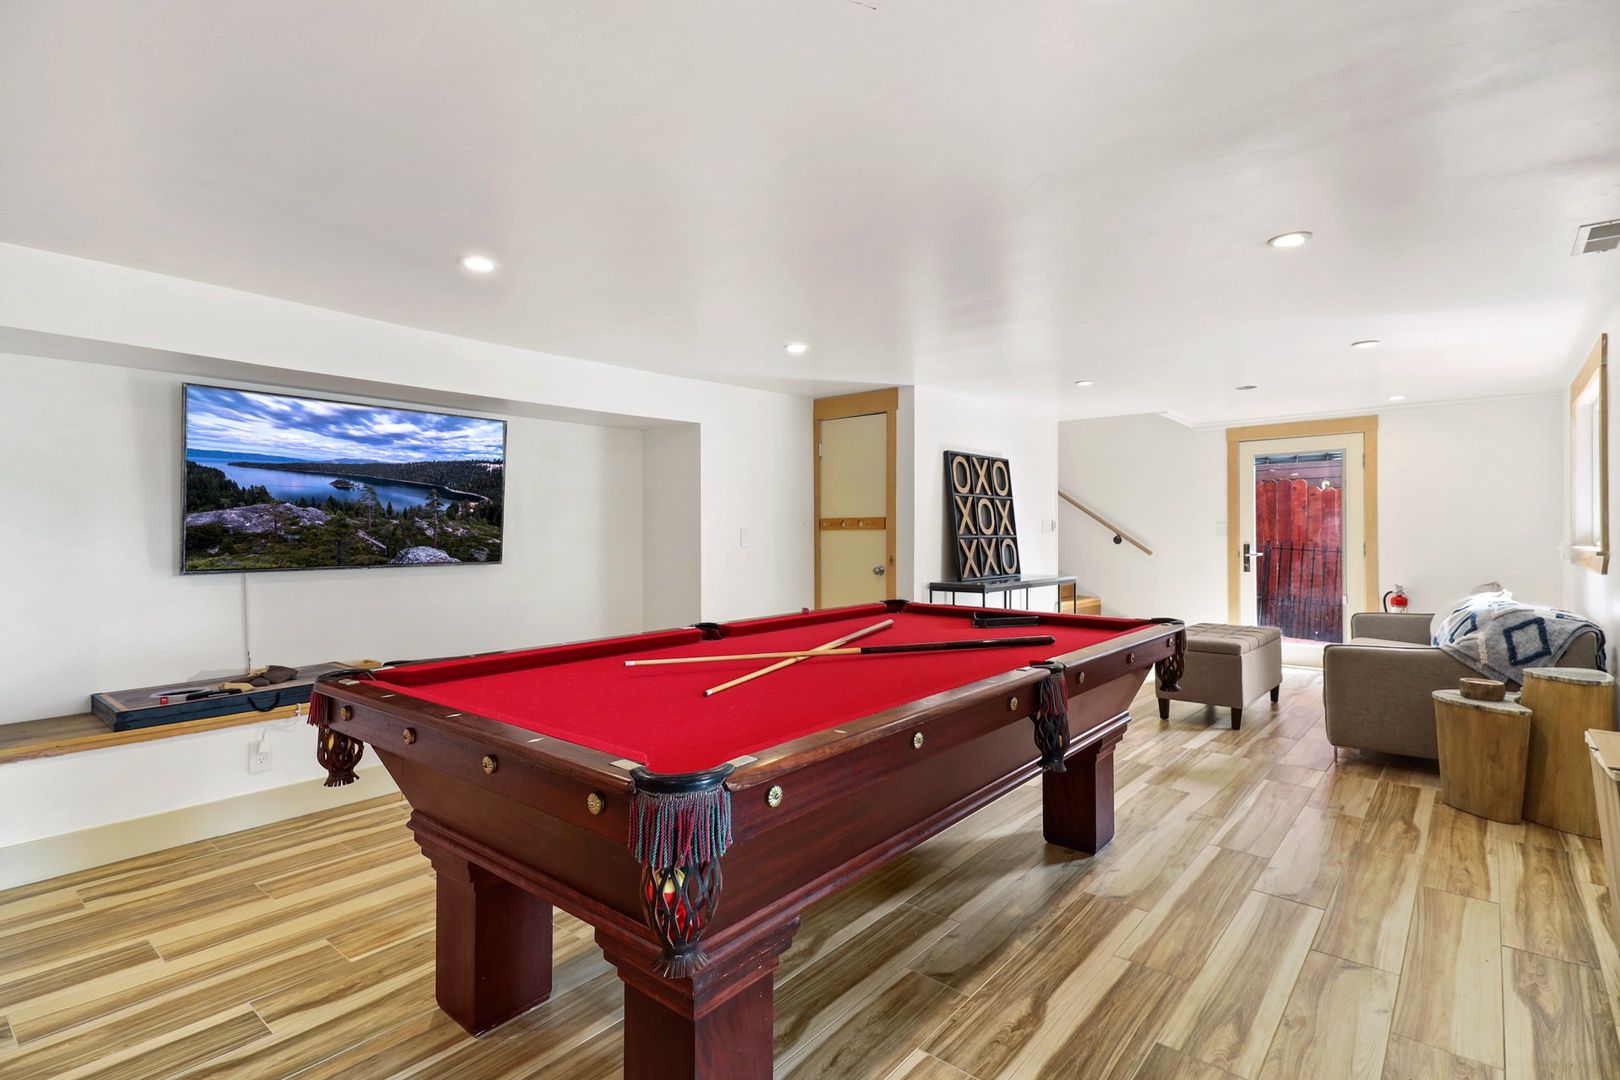 Pool table / Downstairs game area